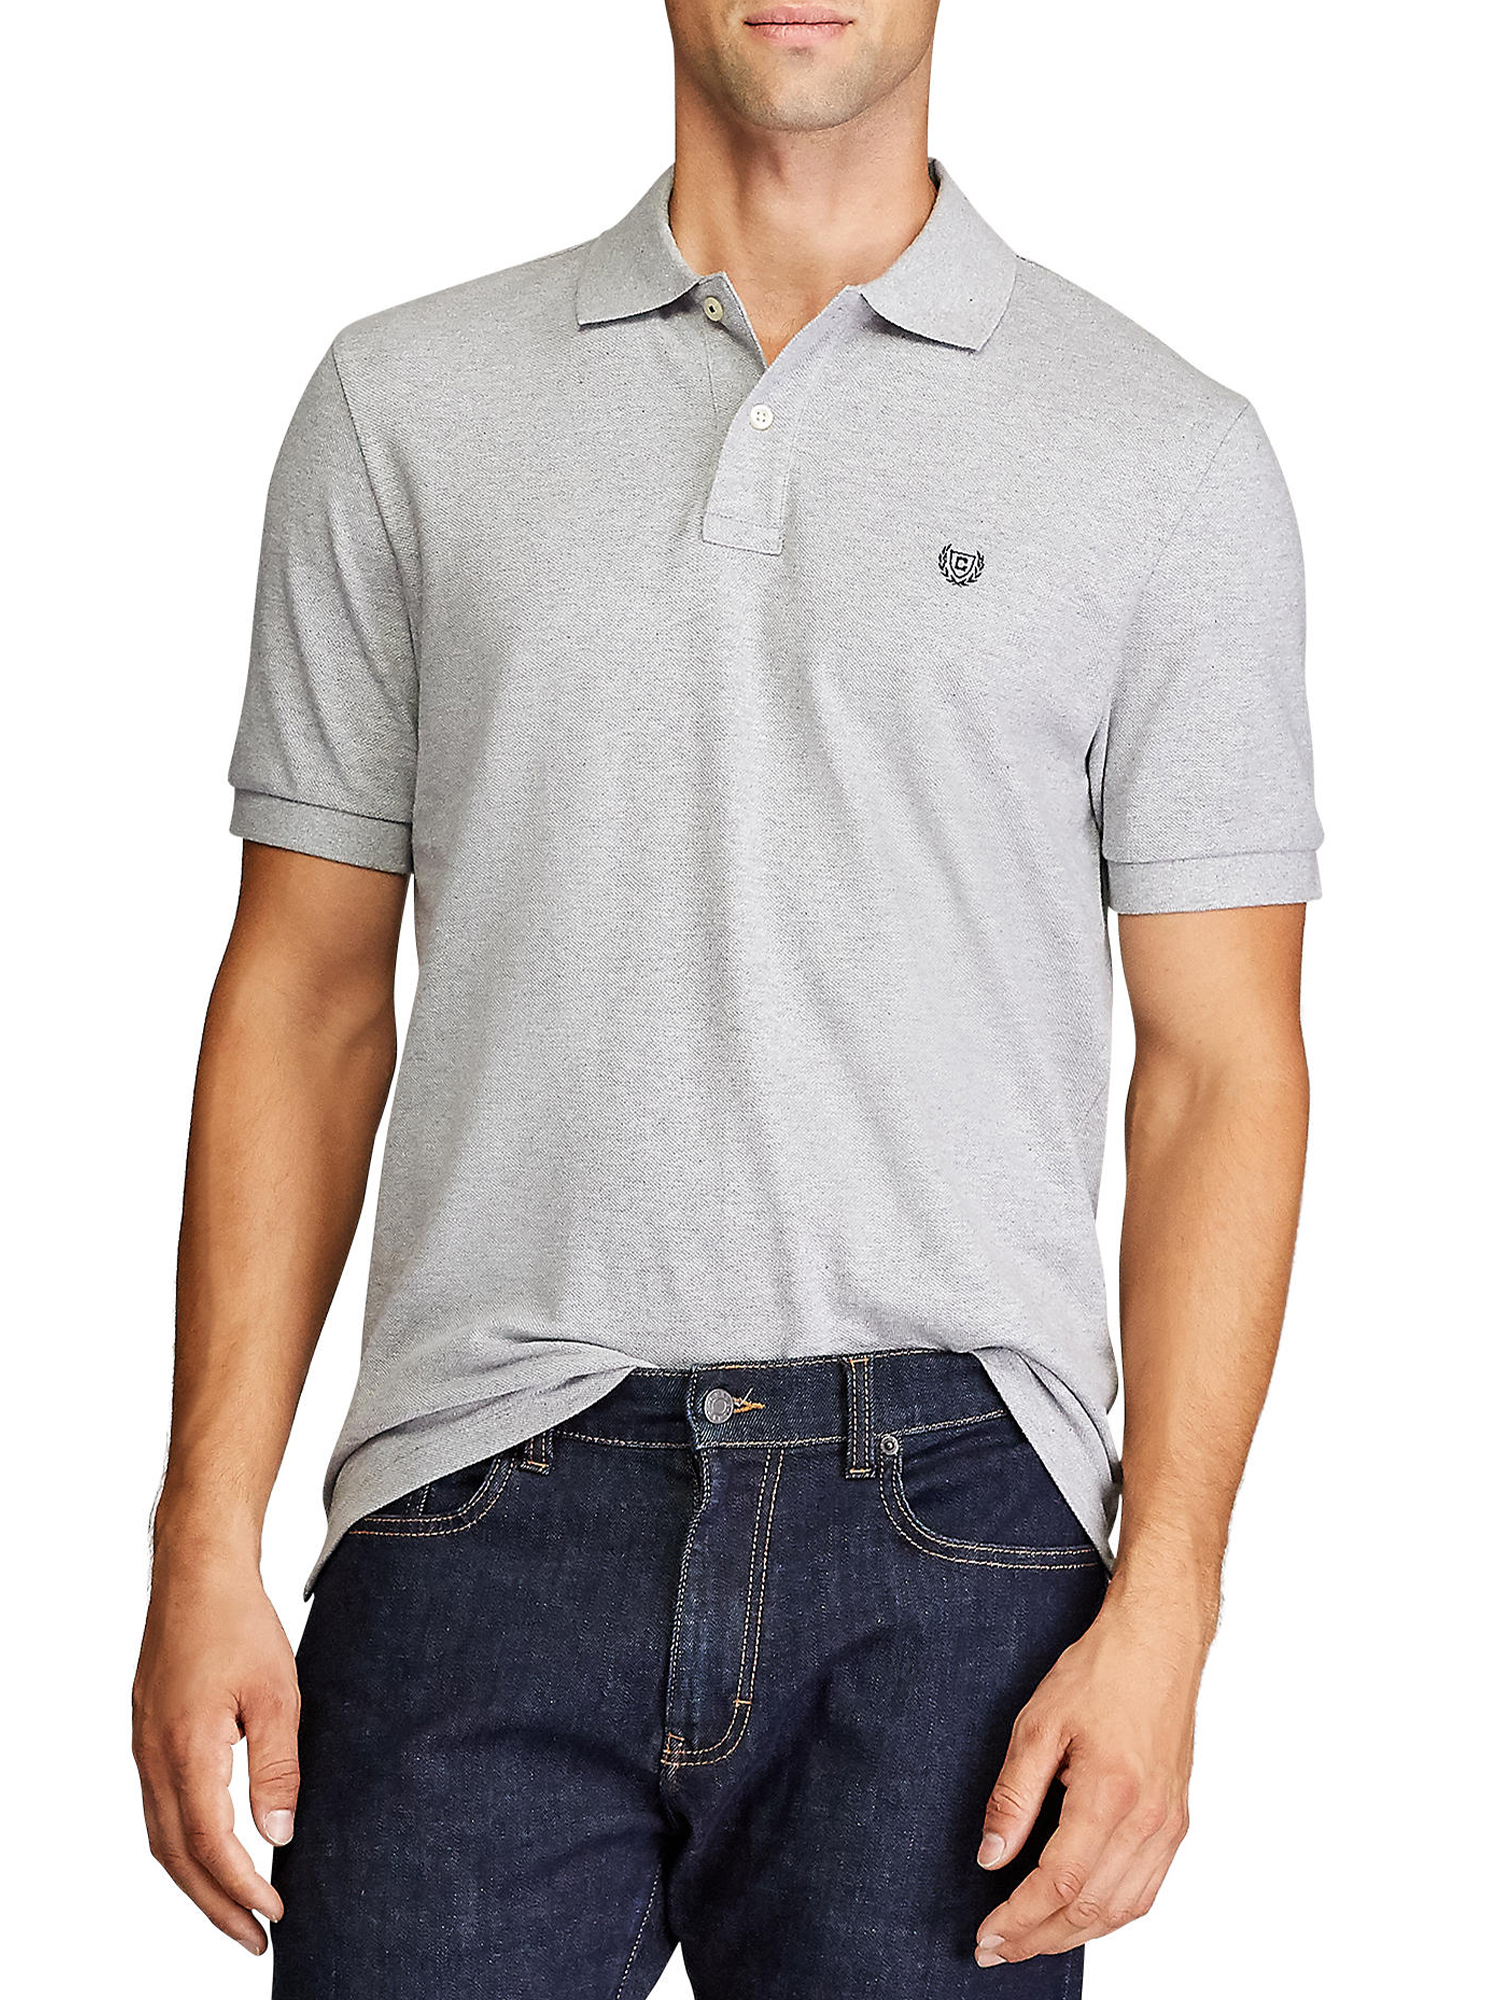 Chaps Men’s & Big and Tall Men's Short Sleeve Everyday Pique Polo Shirt, Sizes S-4XL - image 1 of 3